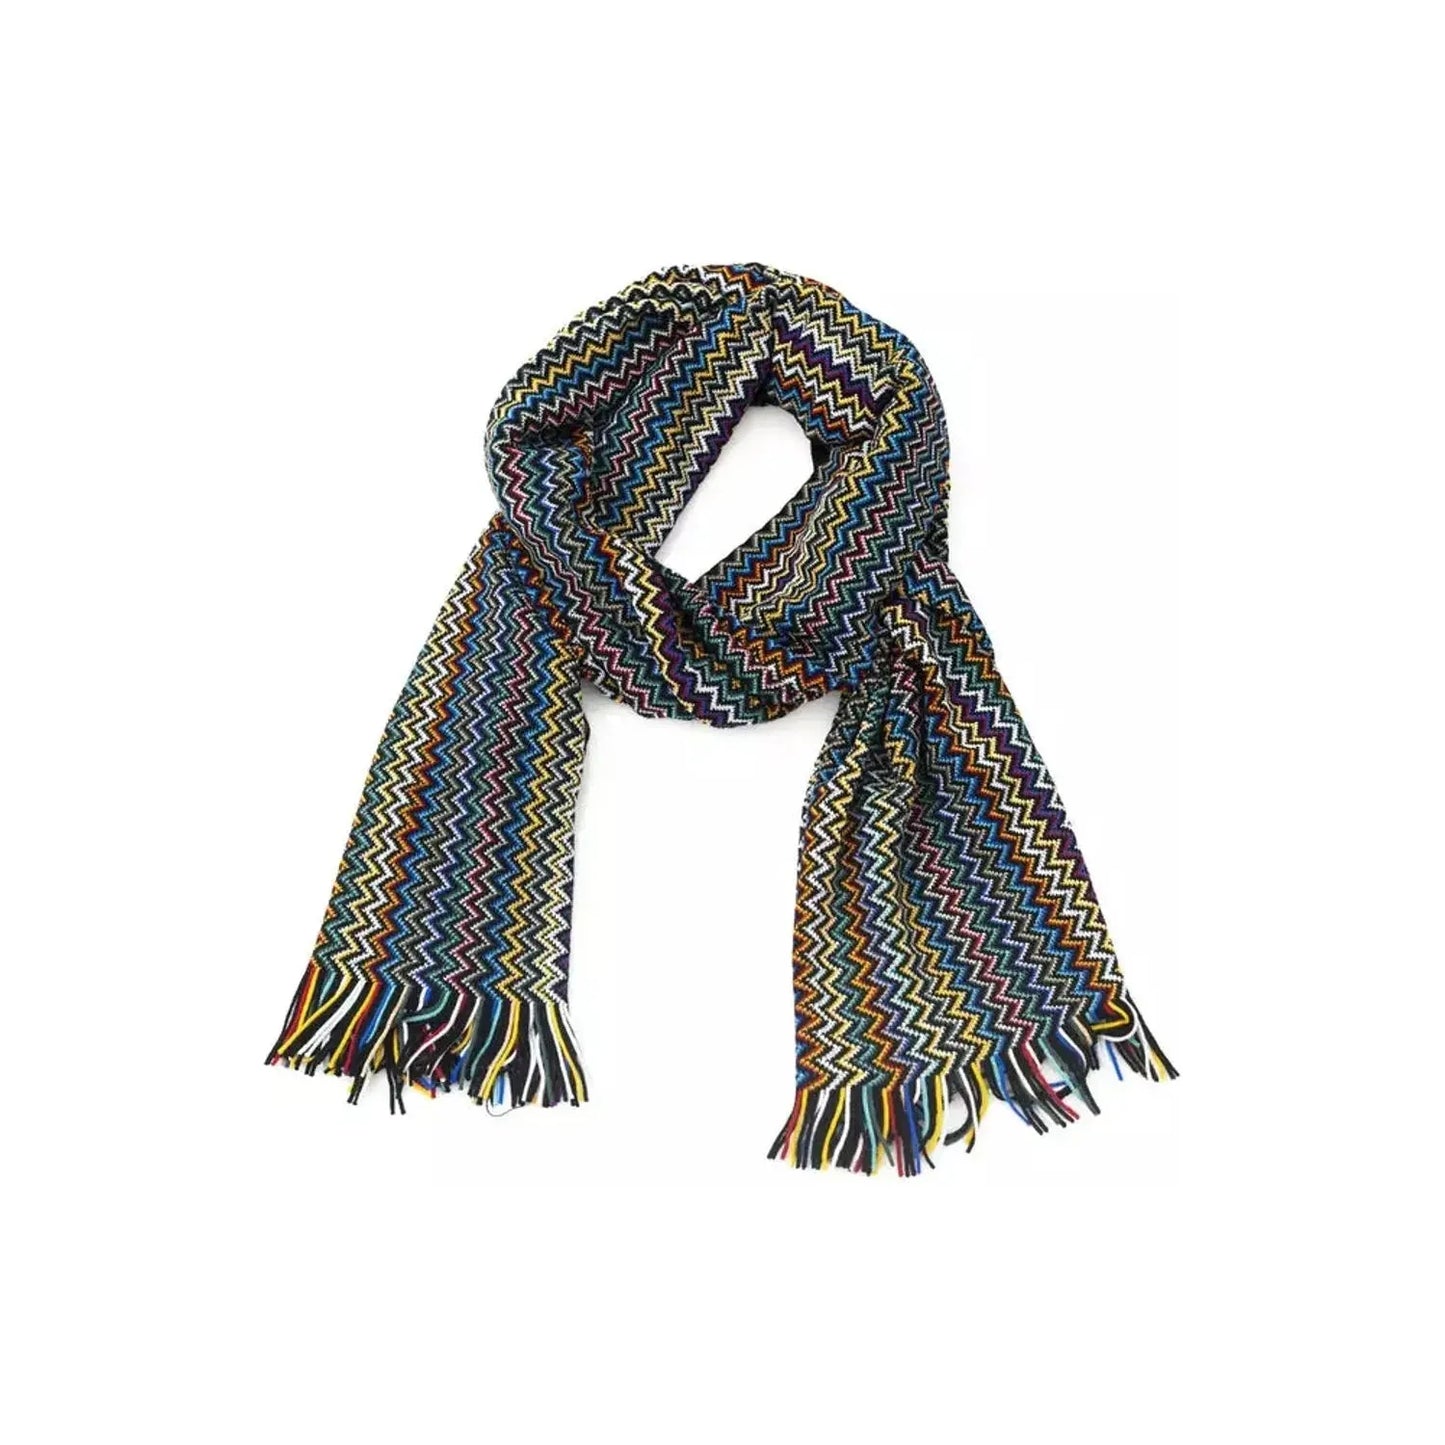 Missoni Geometric Fantasy Chic Fringed Scarf multicolor-wool-scarf product-22228-1839838516-24-58790d18-bc8.webp